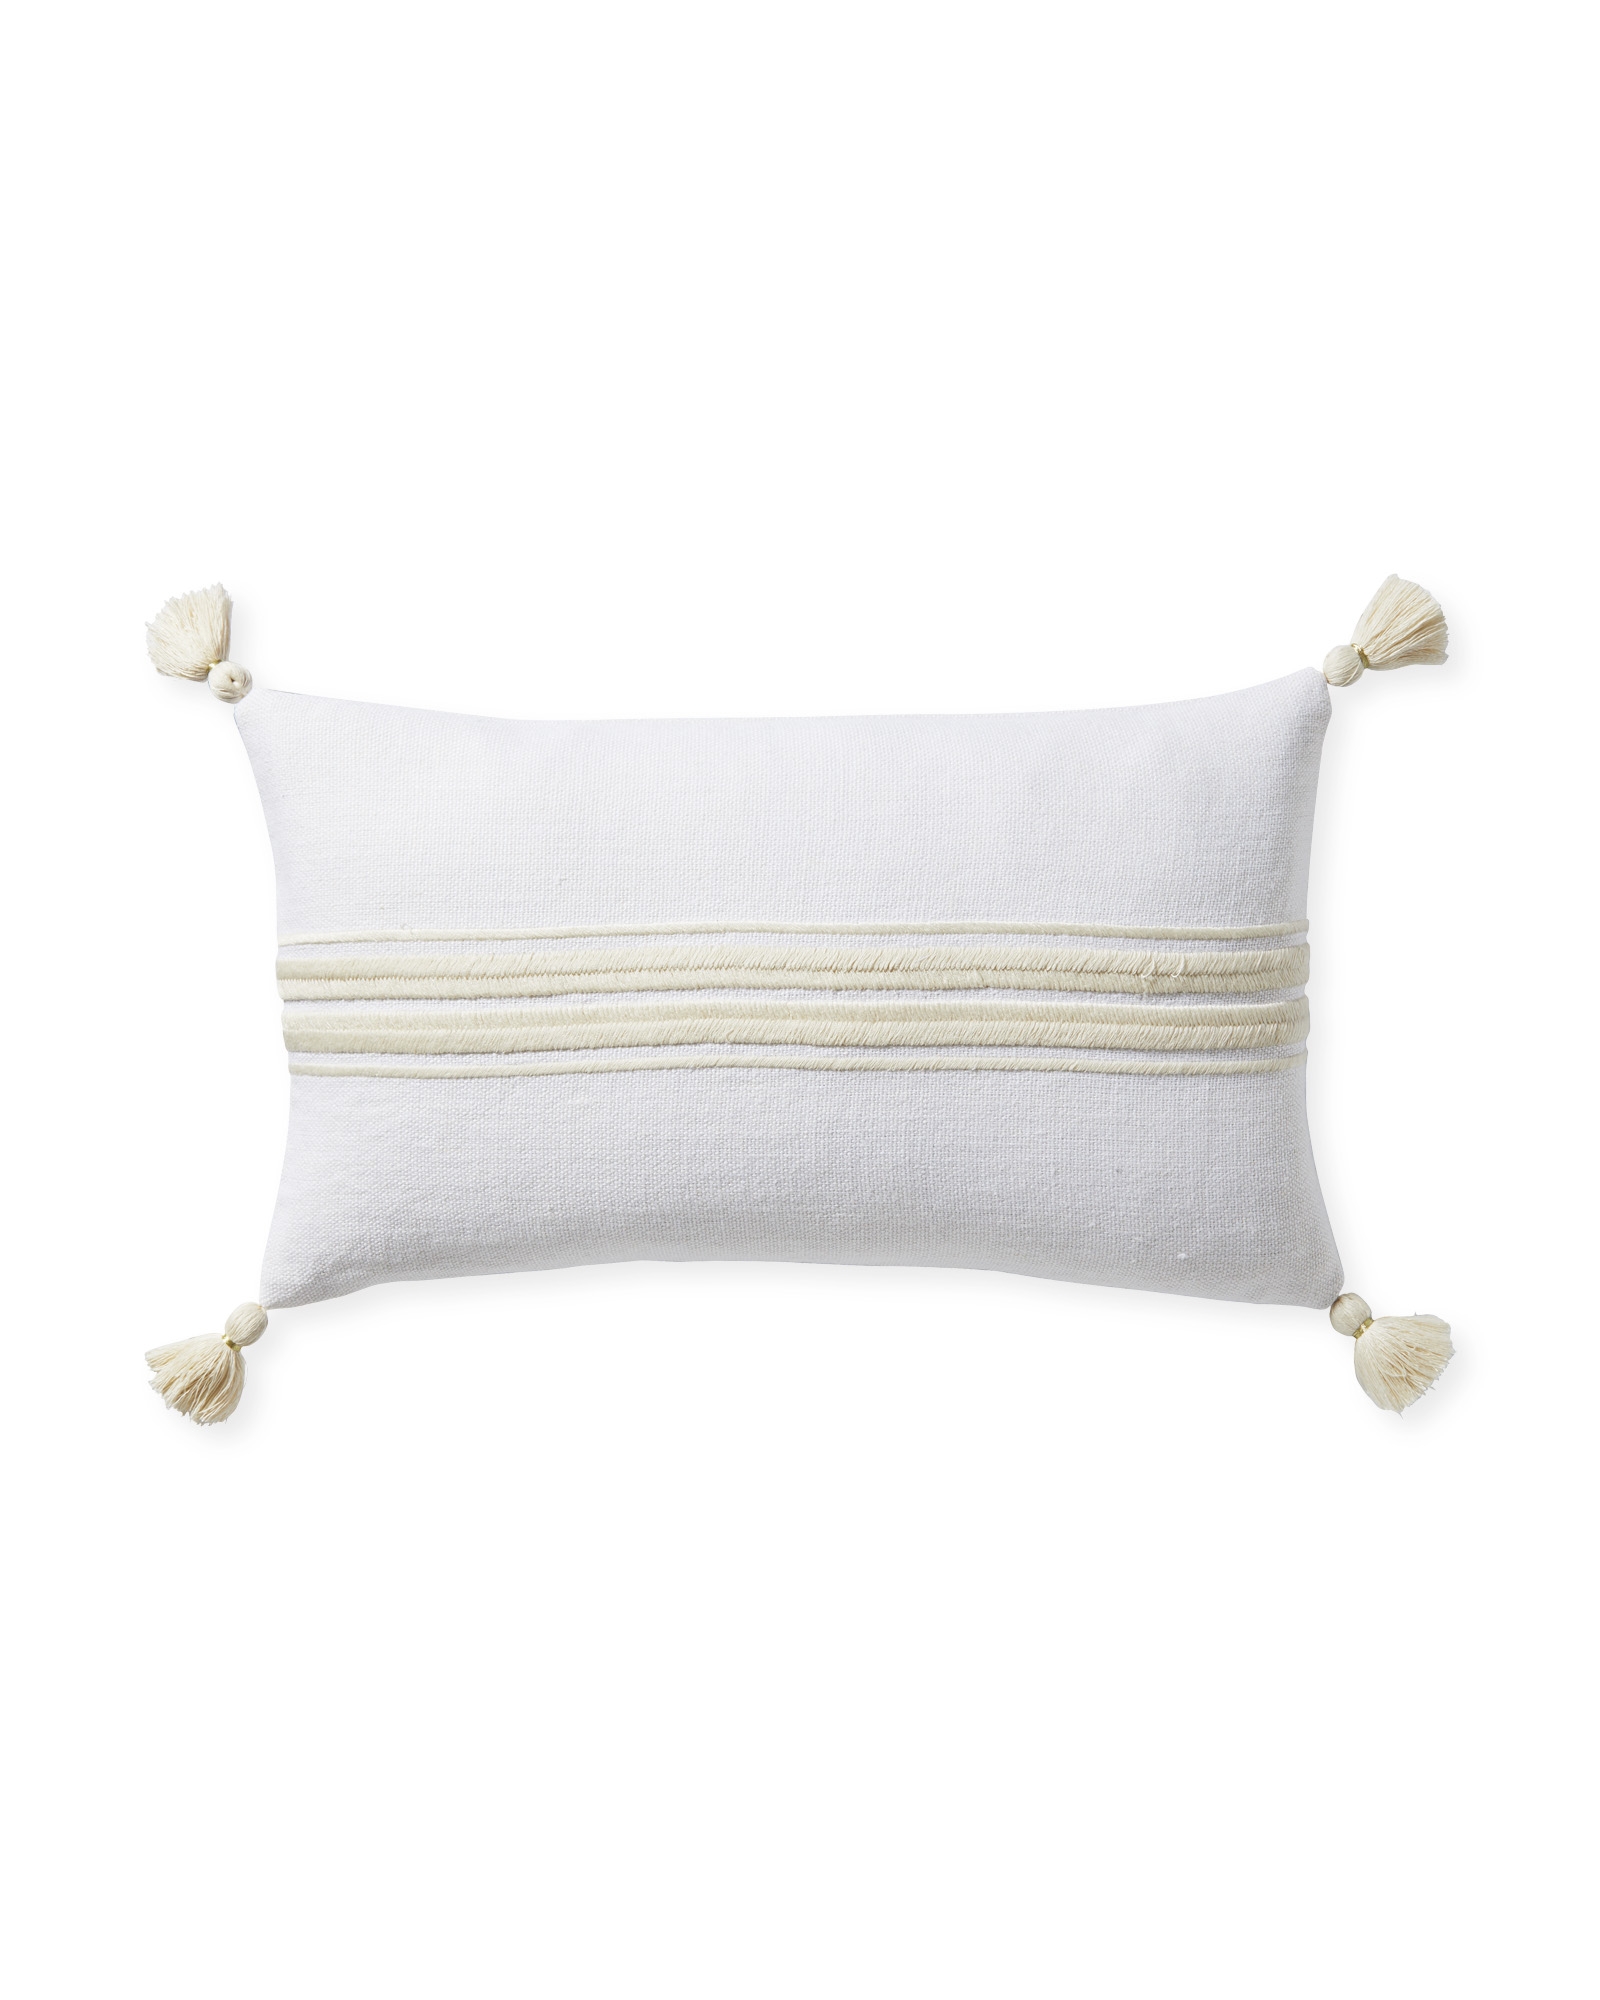 Addie Stripe Tassel 12" x 21" Pillow Cover - White/Ivory- Insert Sold Separately - Image 0